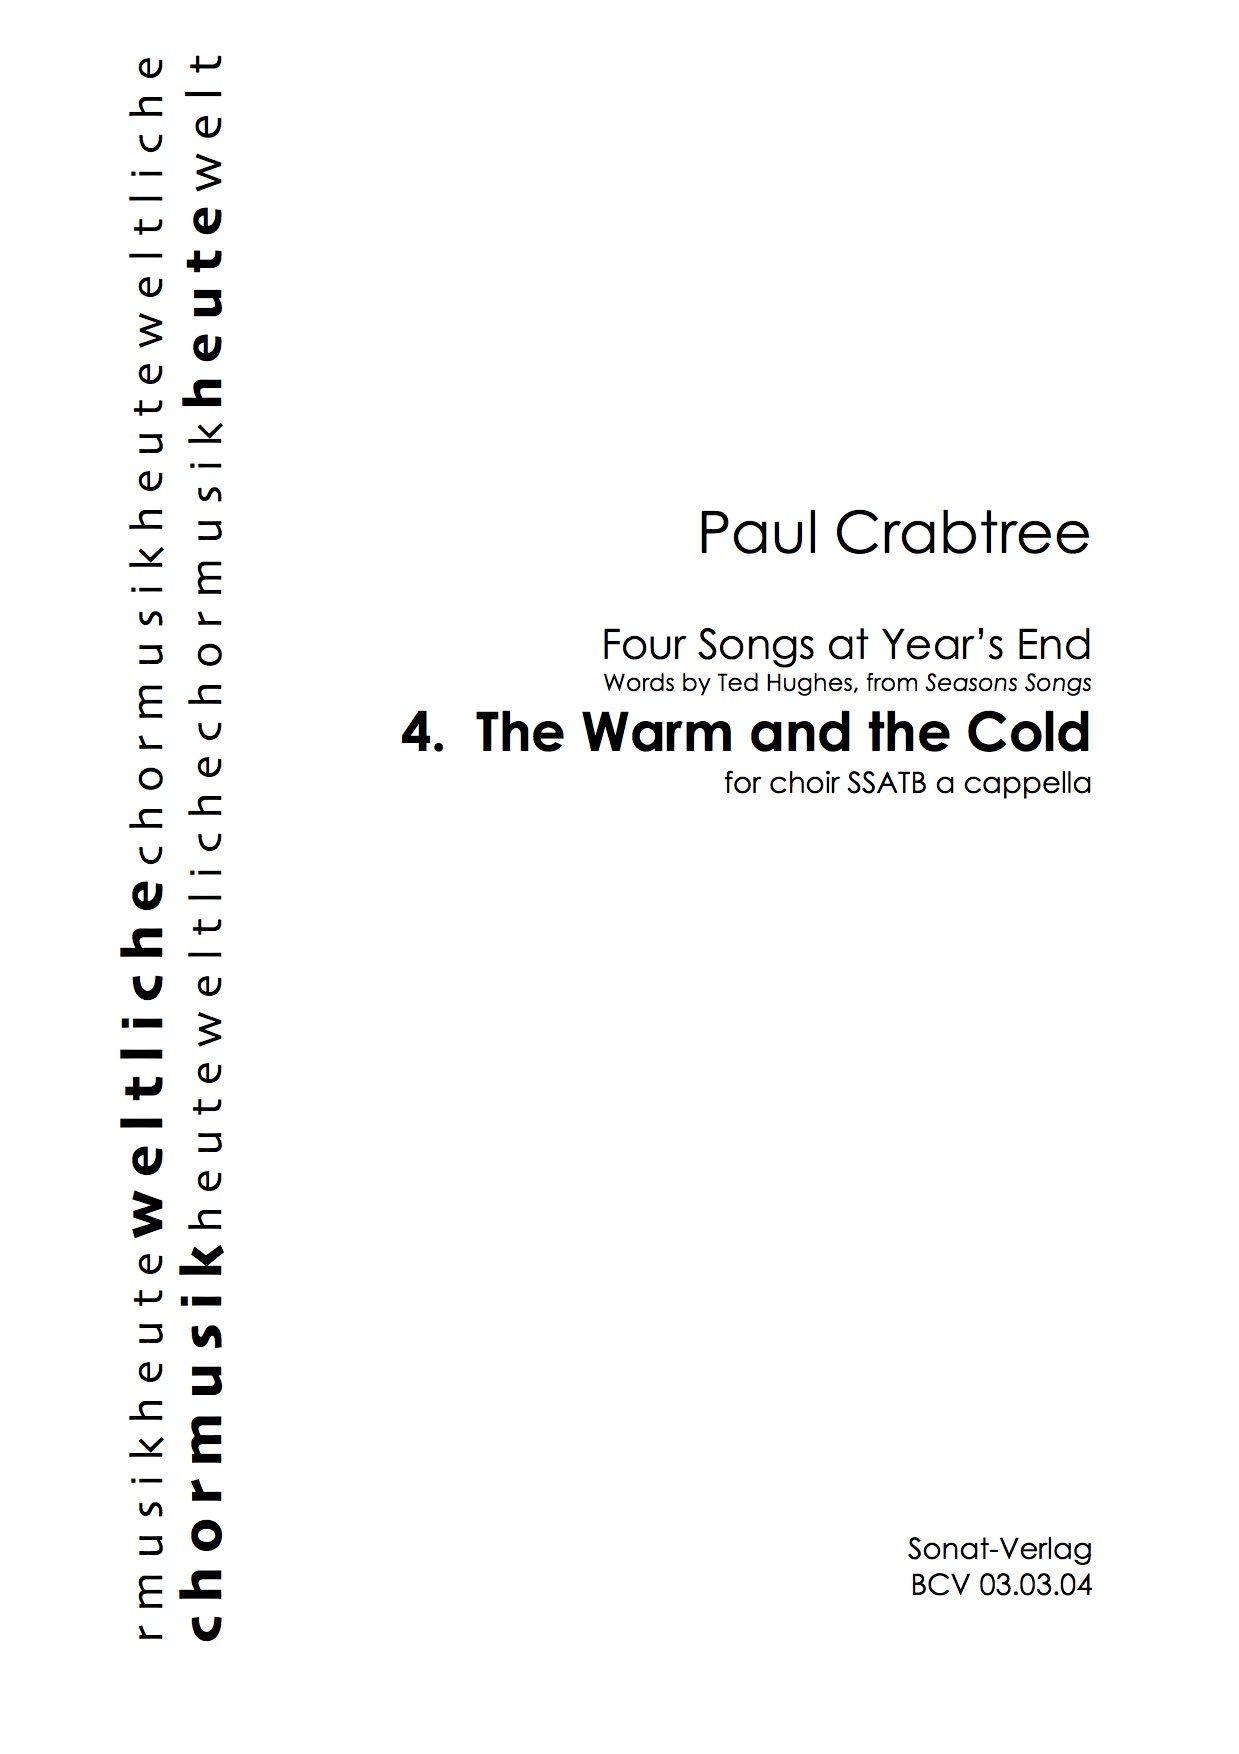 The warm and the cold